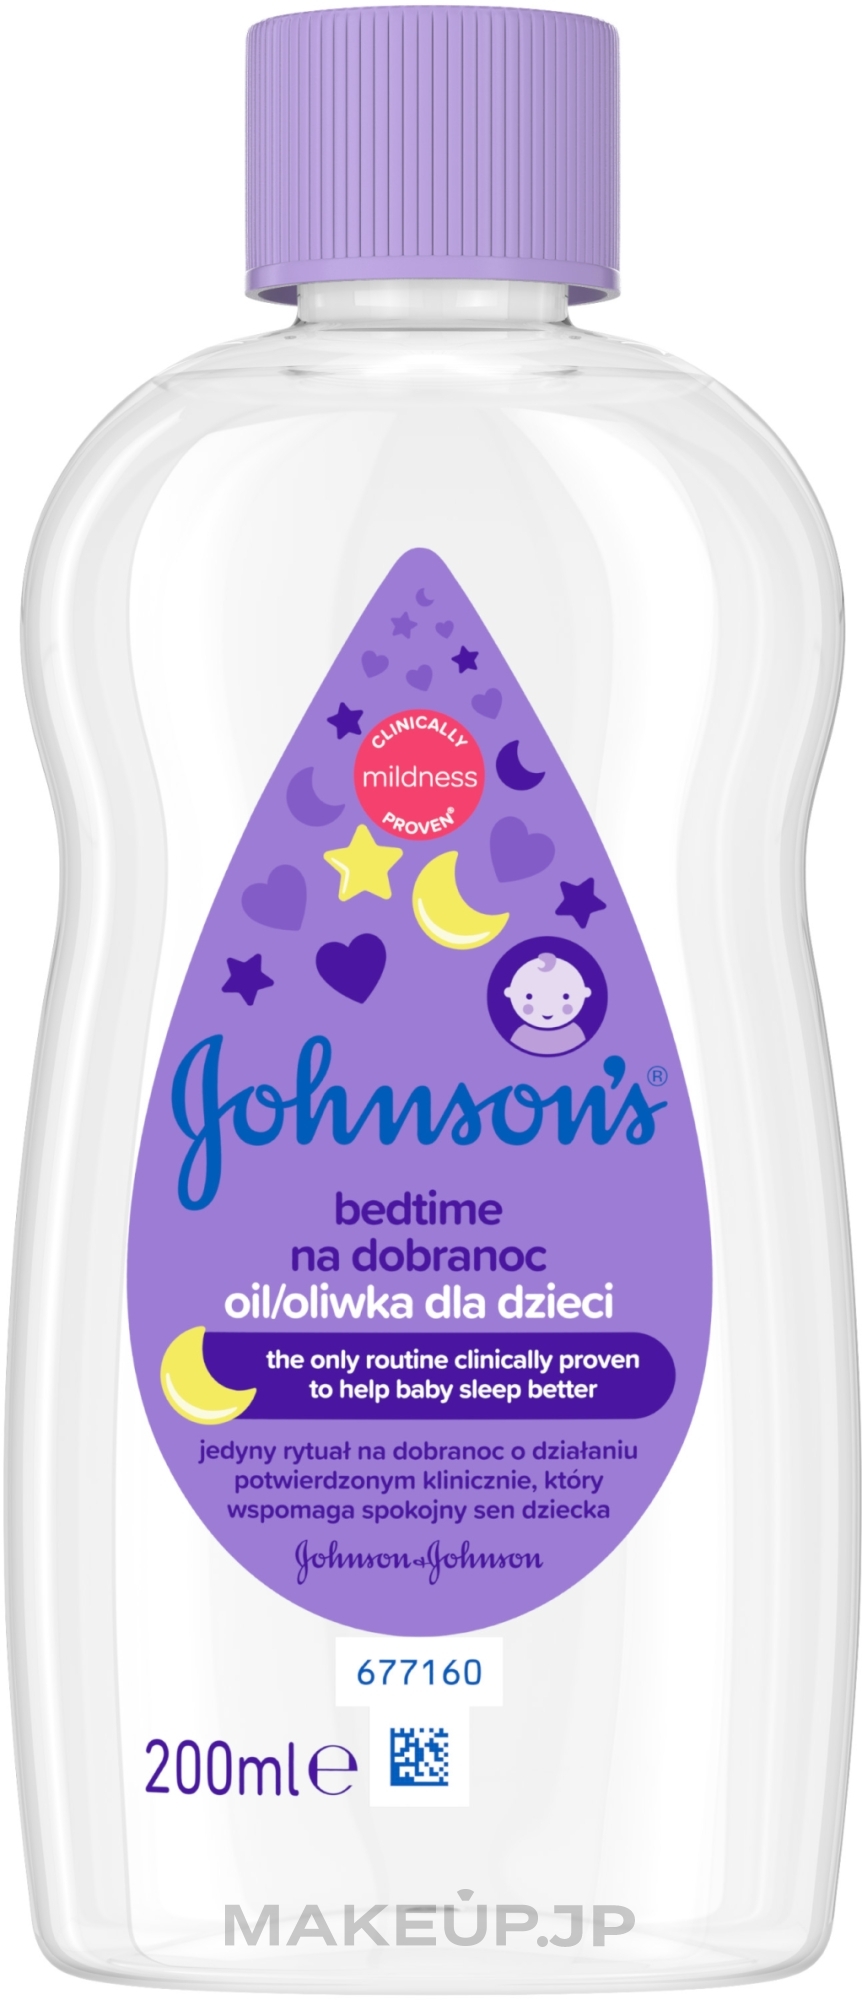 Body Oil "Before Bed" - Johnson’s Baby — photo 200 ml